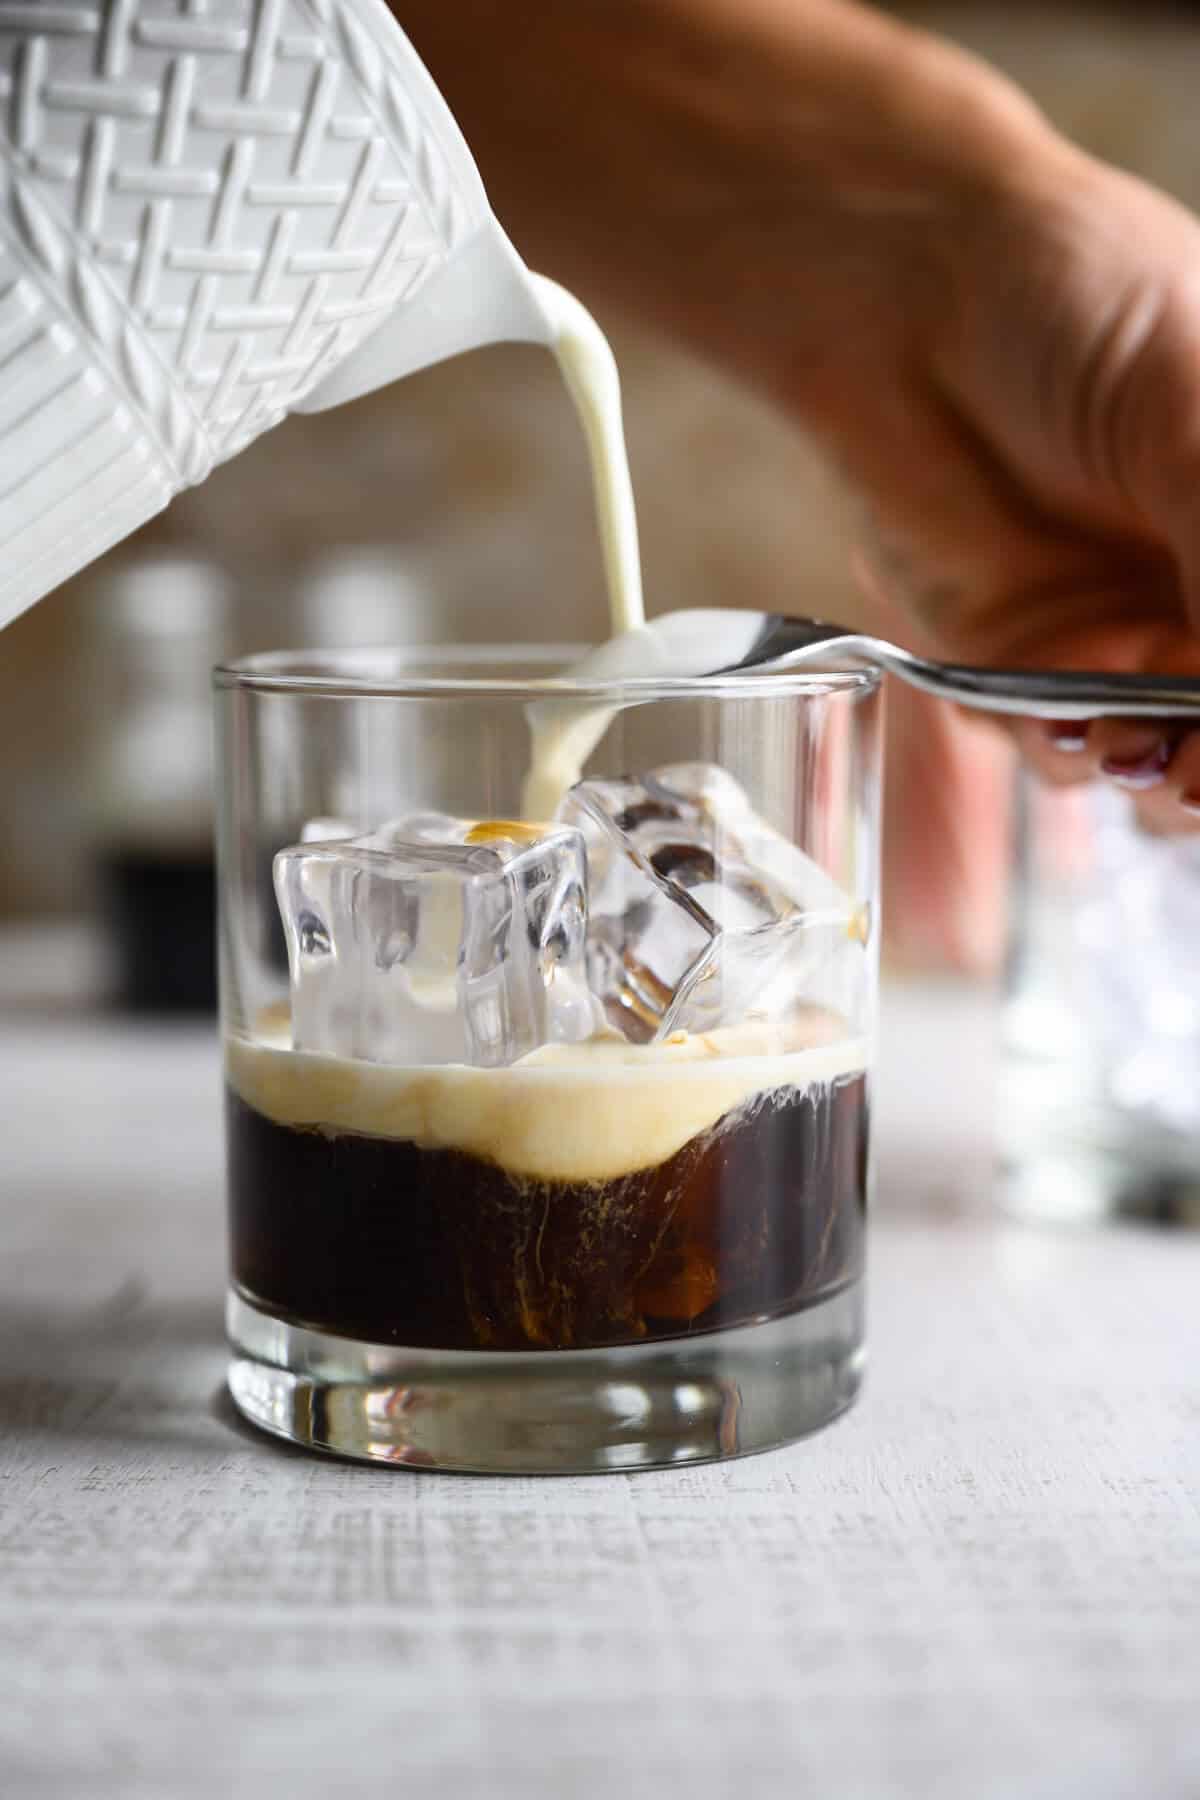 cream being floated over coffee in a white russian